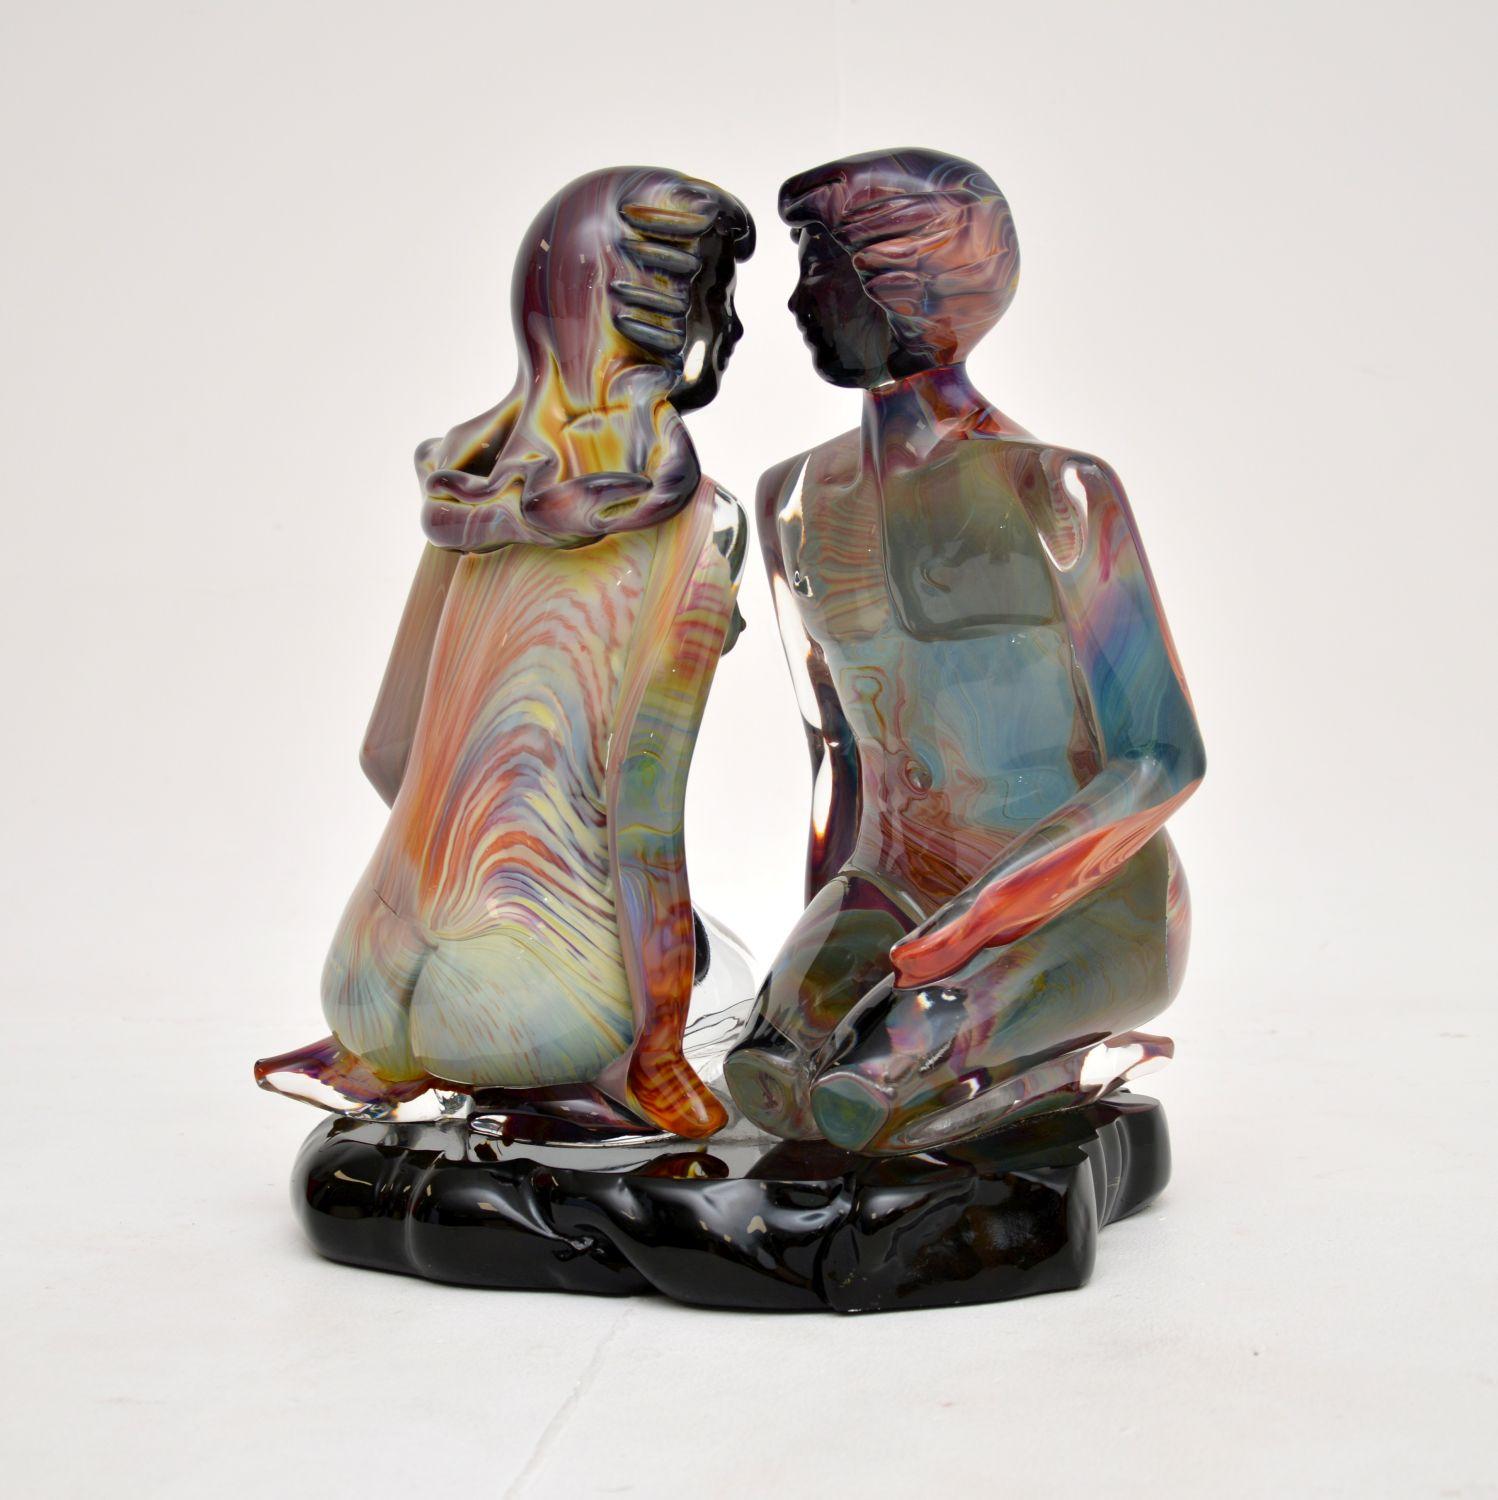 An exquisite Italian Murano glass sculpture of two young lovers. This is by artist Dino Rosin, it dates from the late twentieth century.

The level of craftsmanship is outstanding, this is beautifully made with incredible colours and patterns.

The